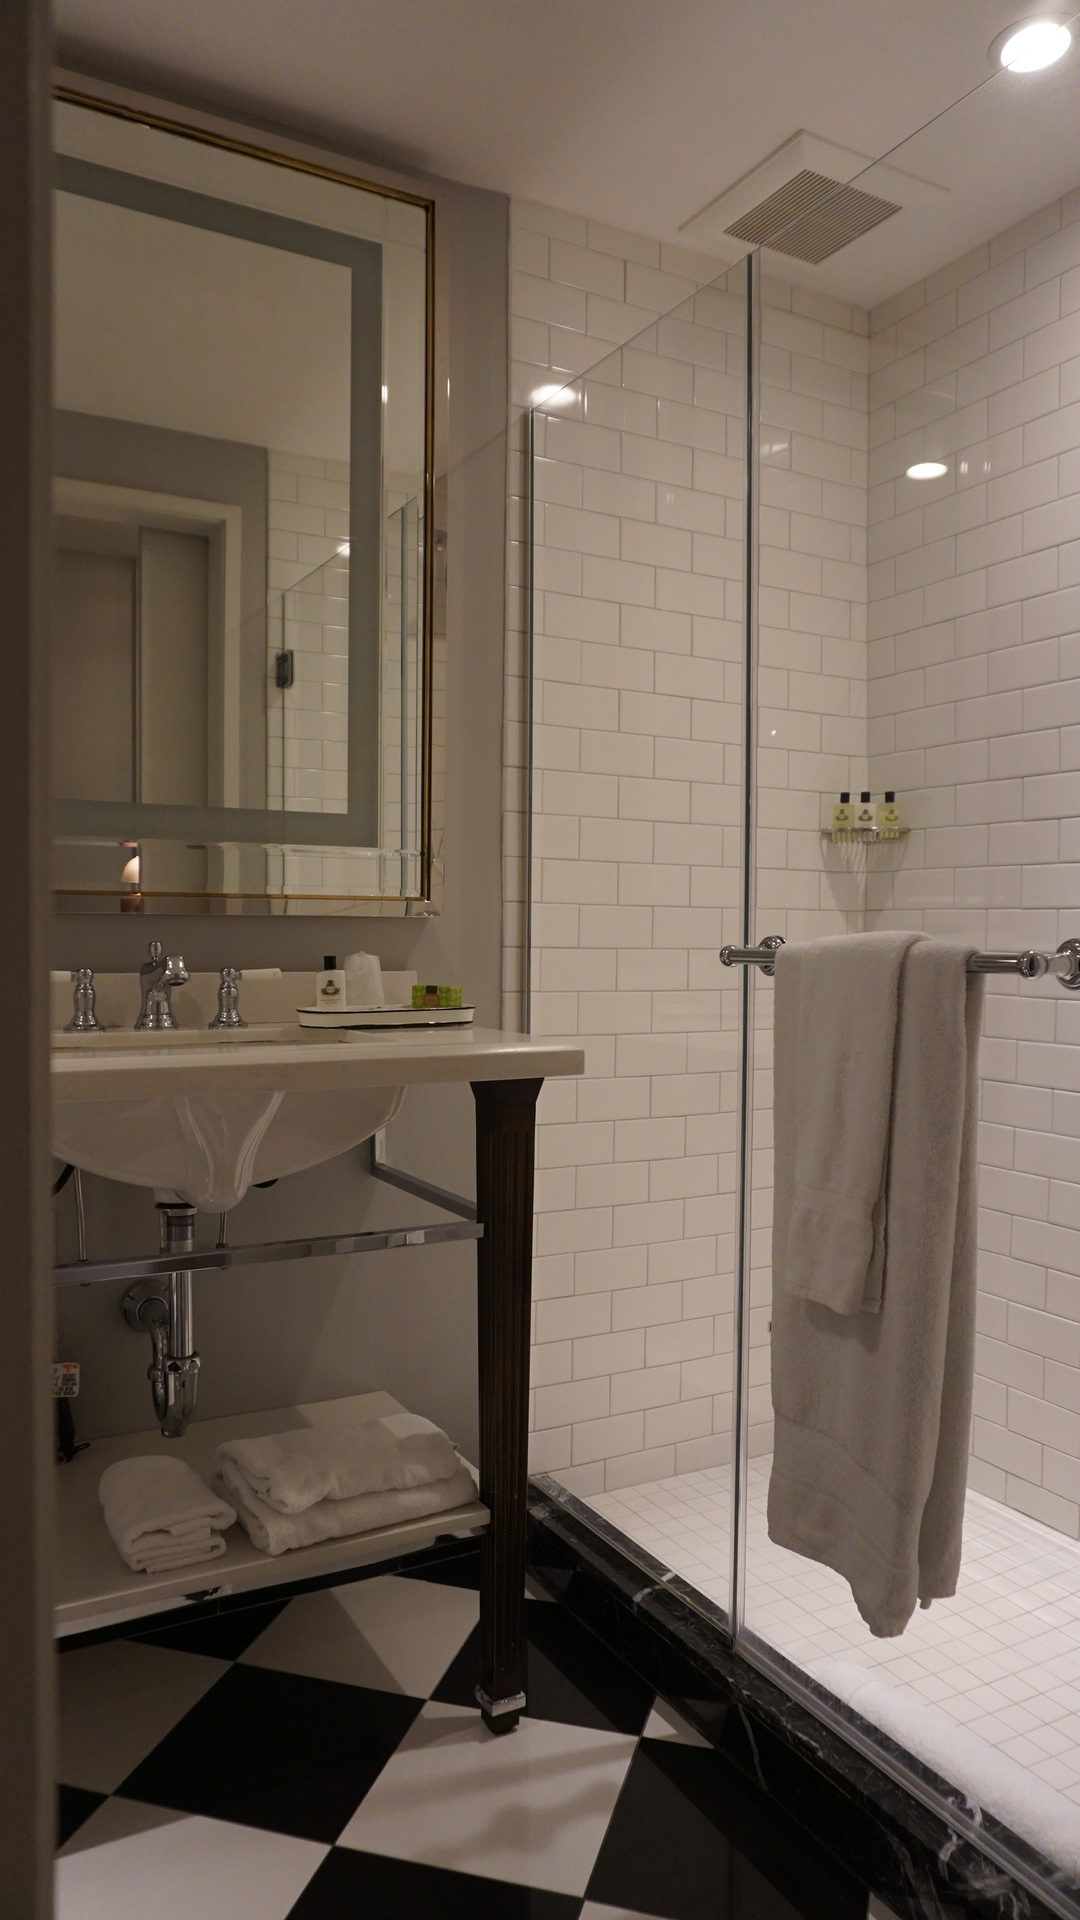 Hotel Review: InterContinental New York Barclay | PinterPoin